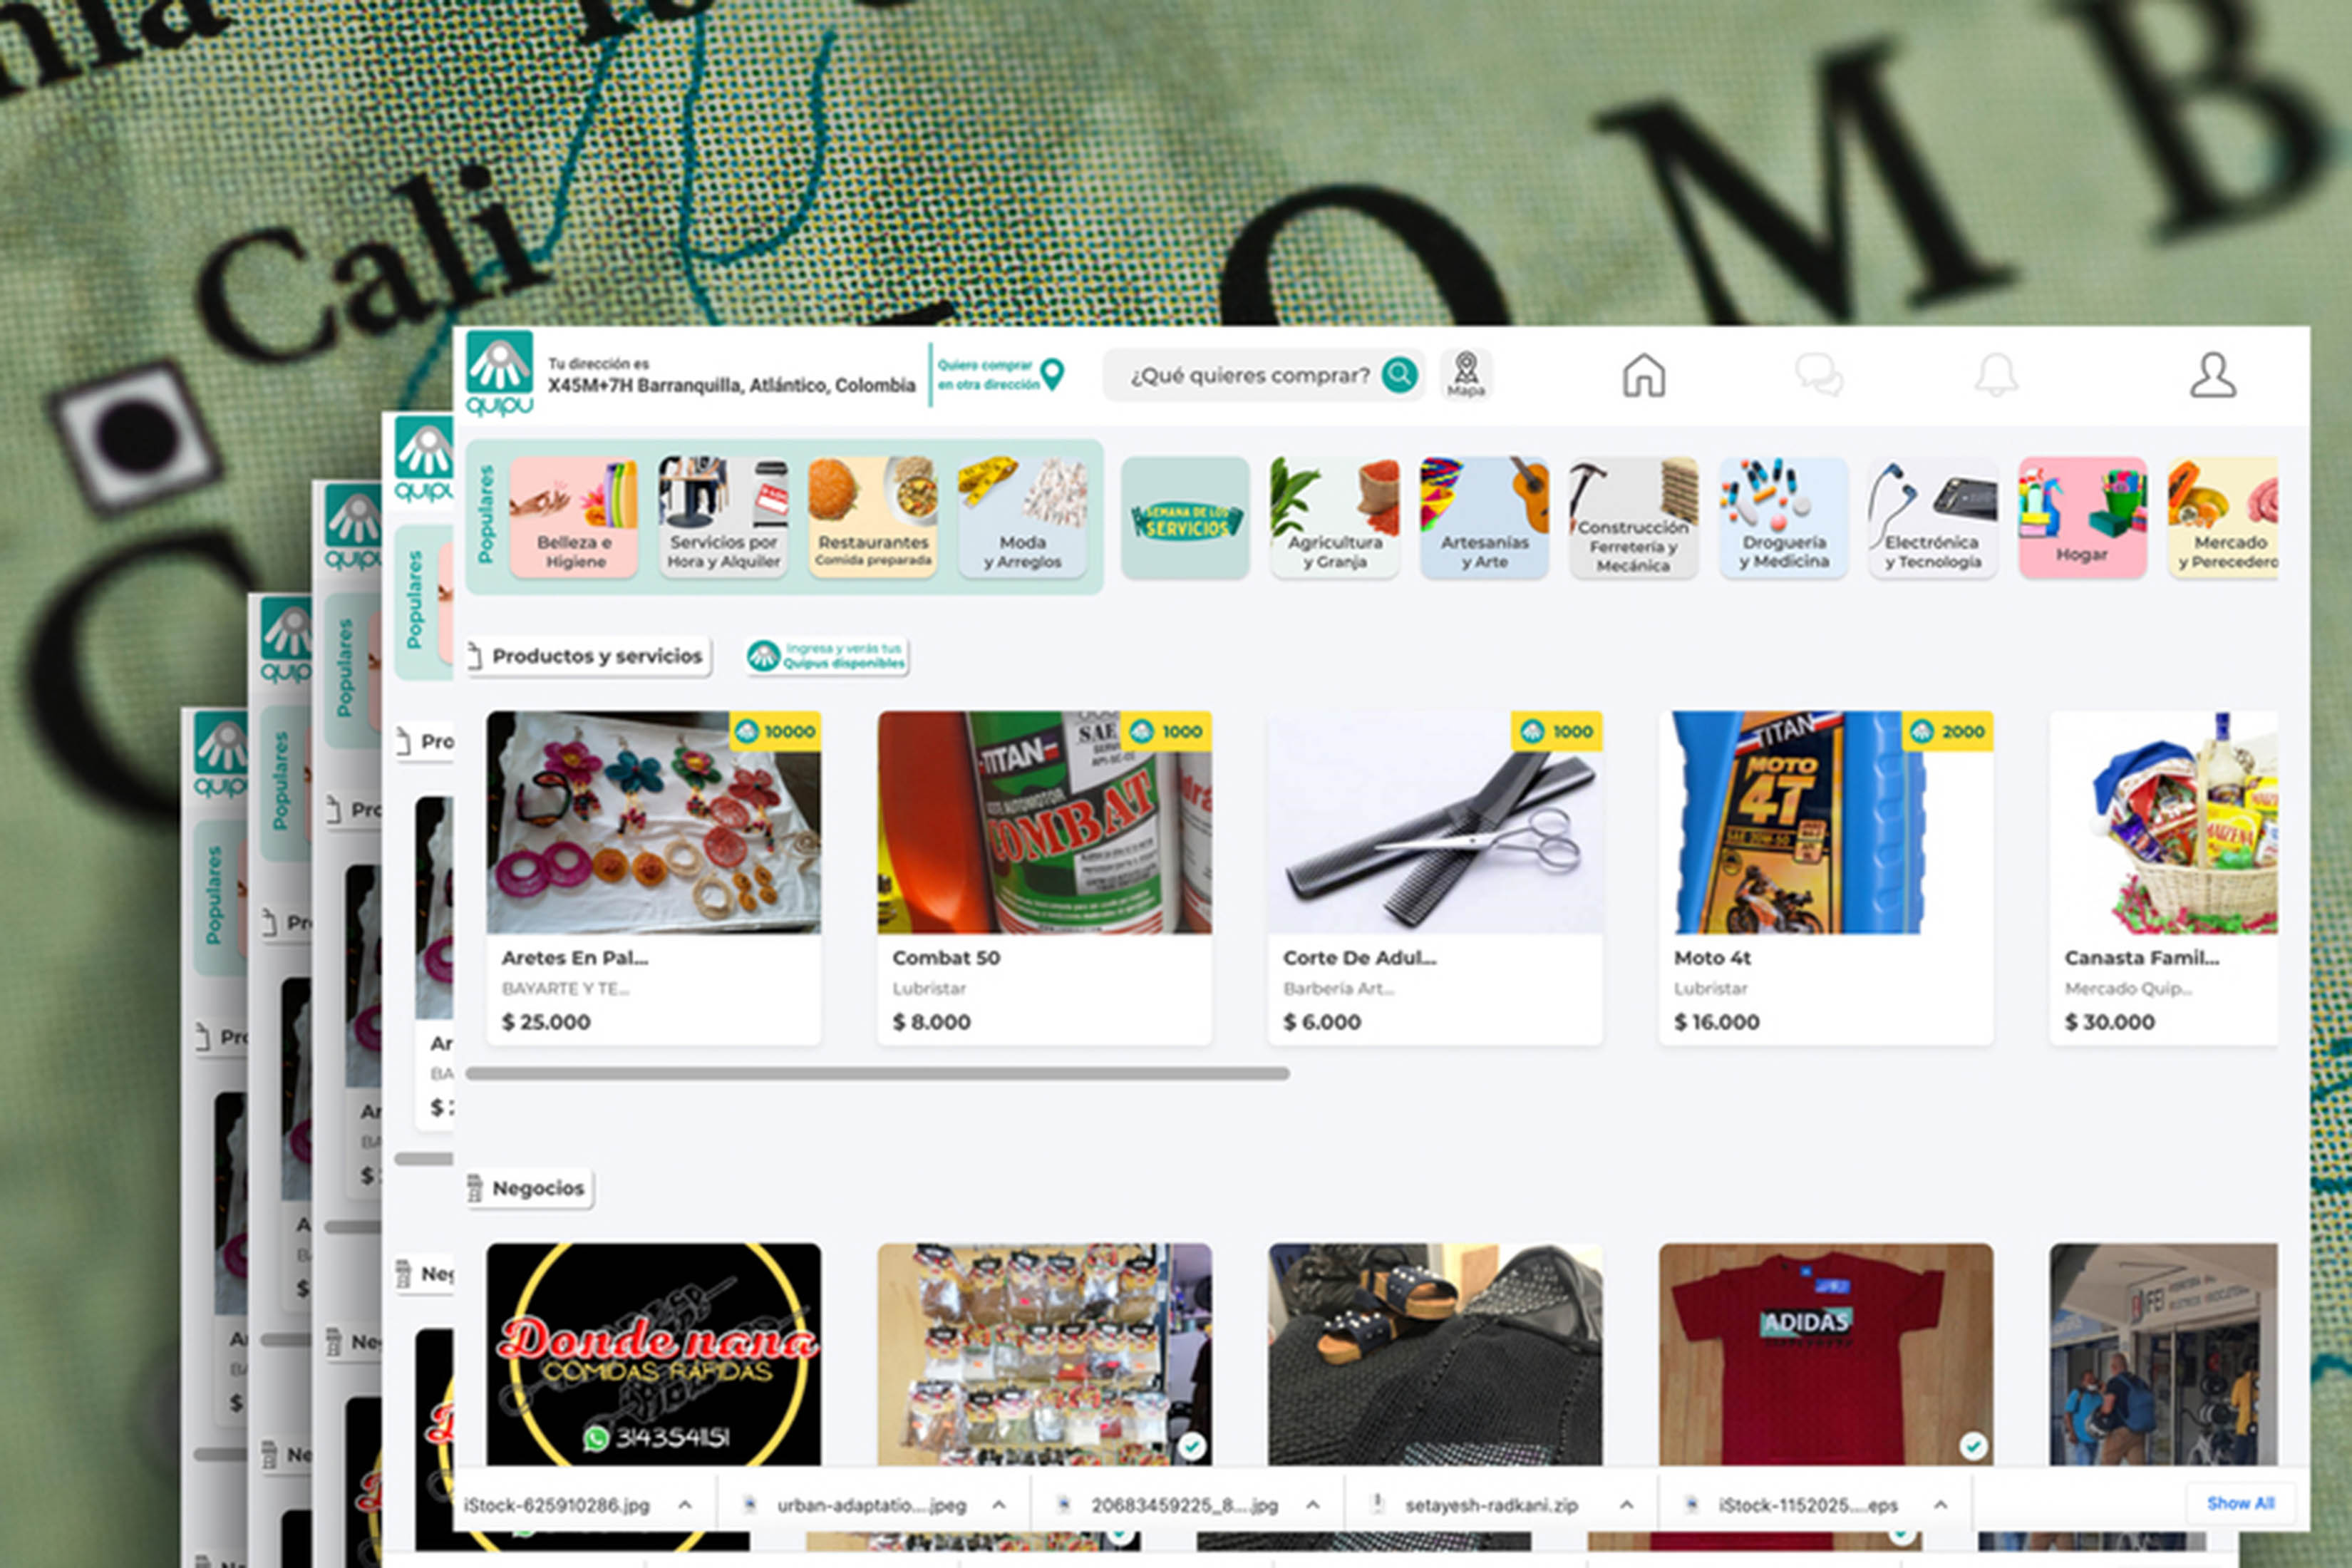 Screenshots of the Quipu market webpage showing household products for sale